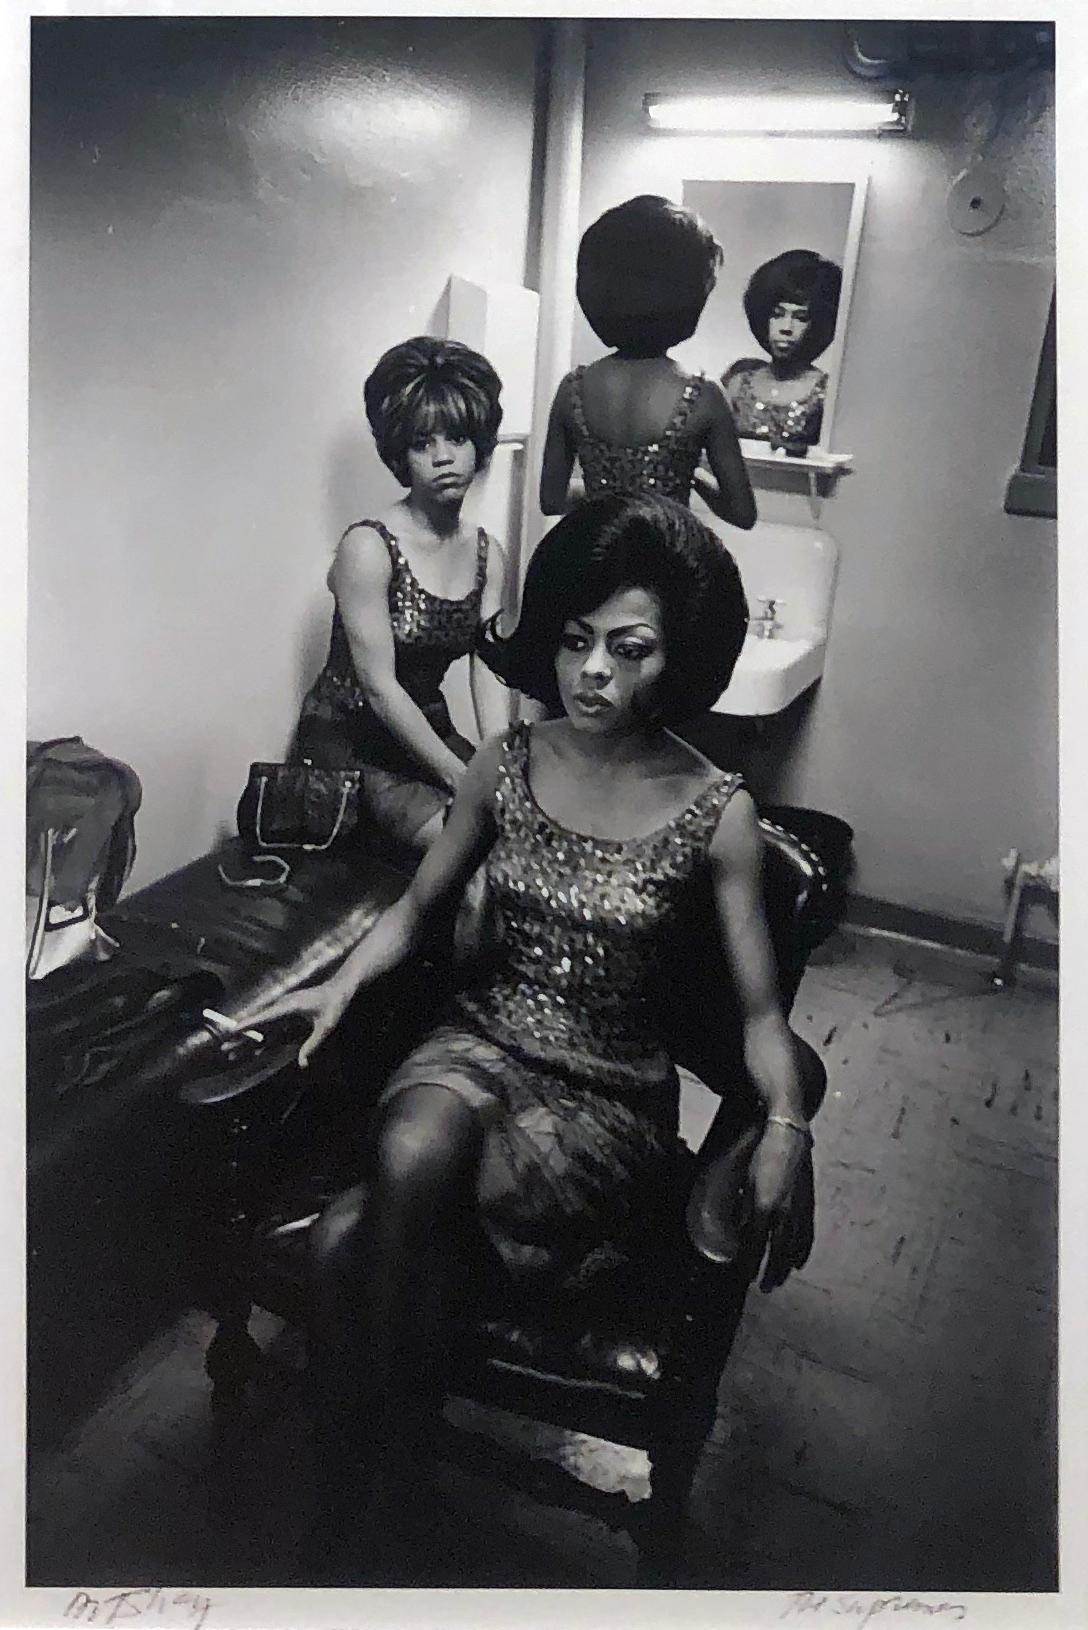 Art Shay Black and White Photograph - Diana Ross & The Supremes, Supremely Tired, Detroit 1965, Black and White Photo